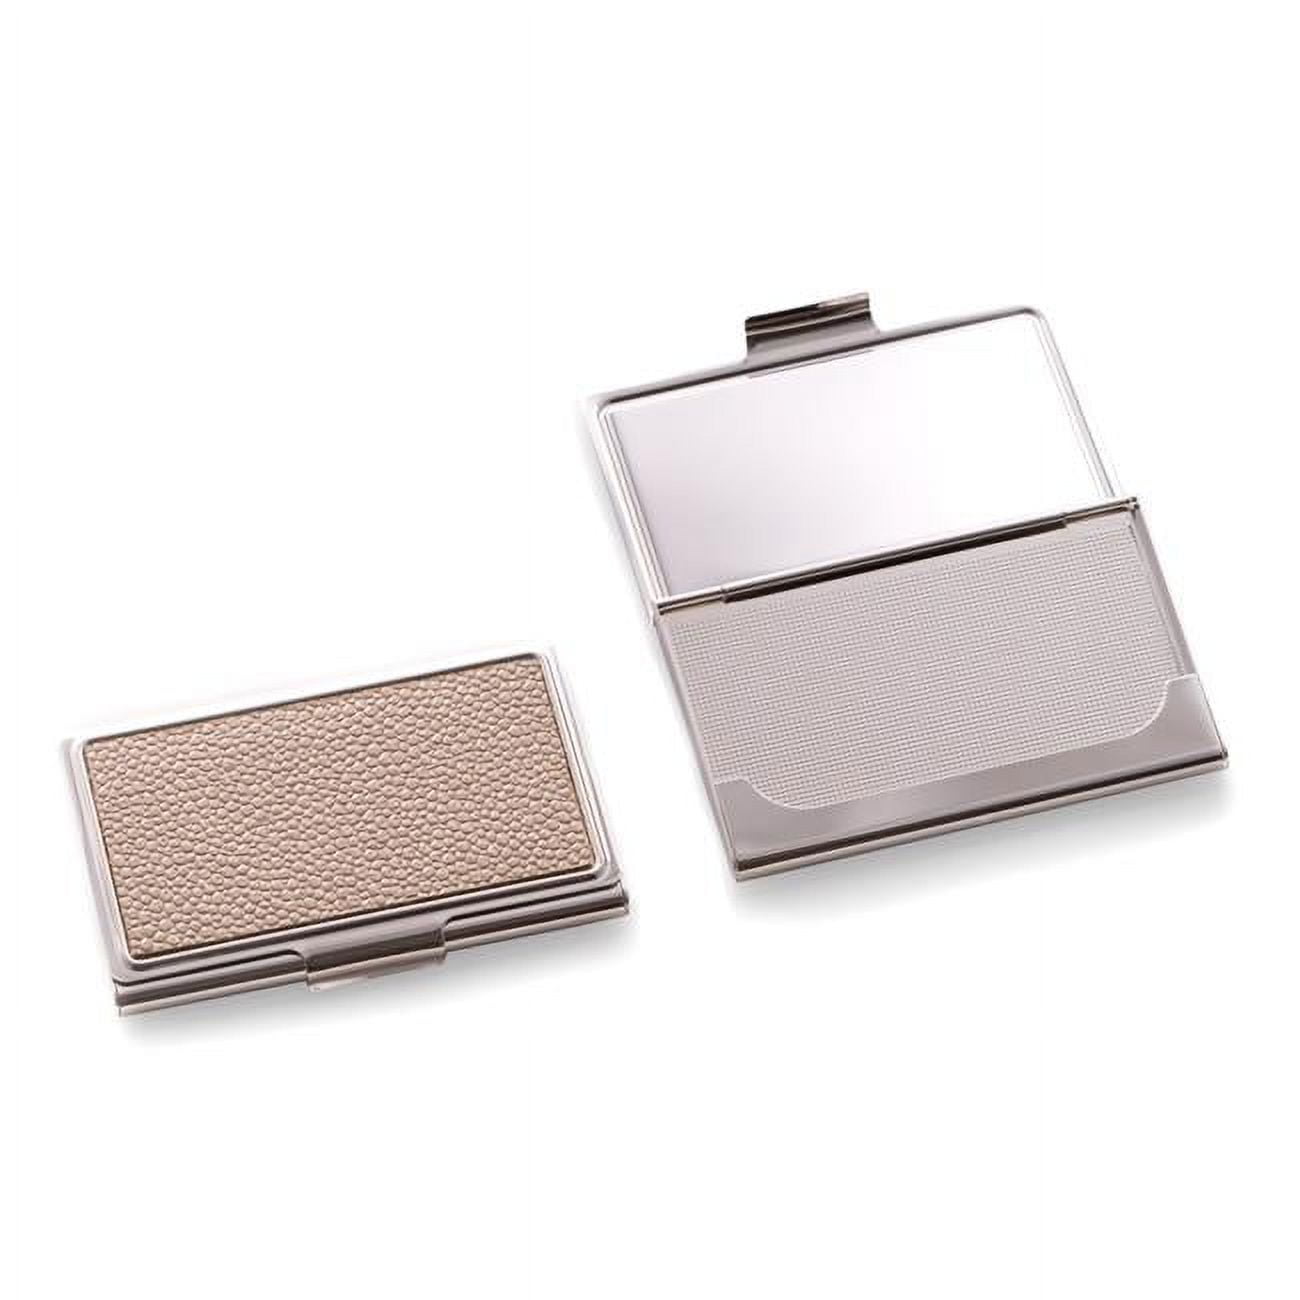 Picture of Bey-Berk International D245 Nickel Plated Business Card Case with Beige Stingray Design 